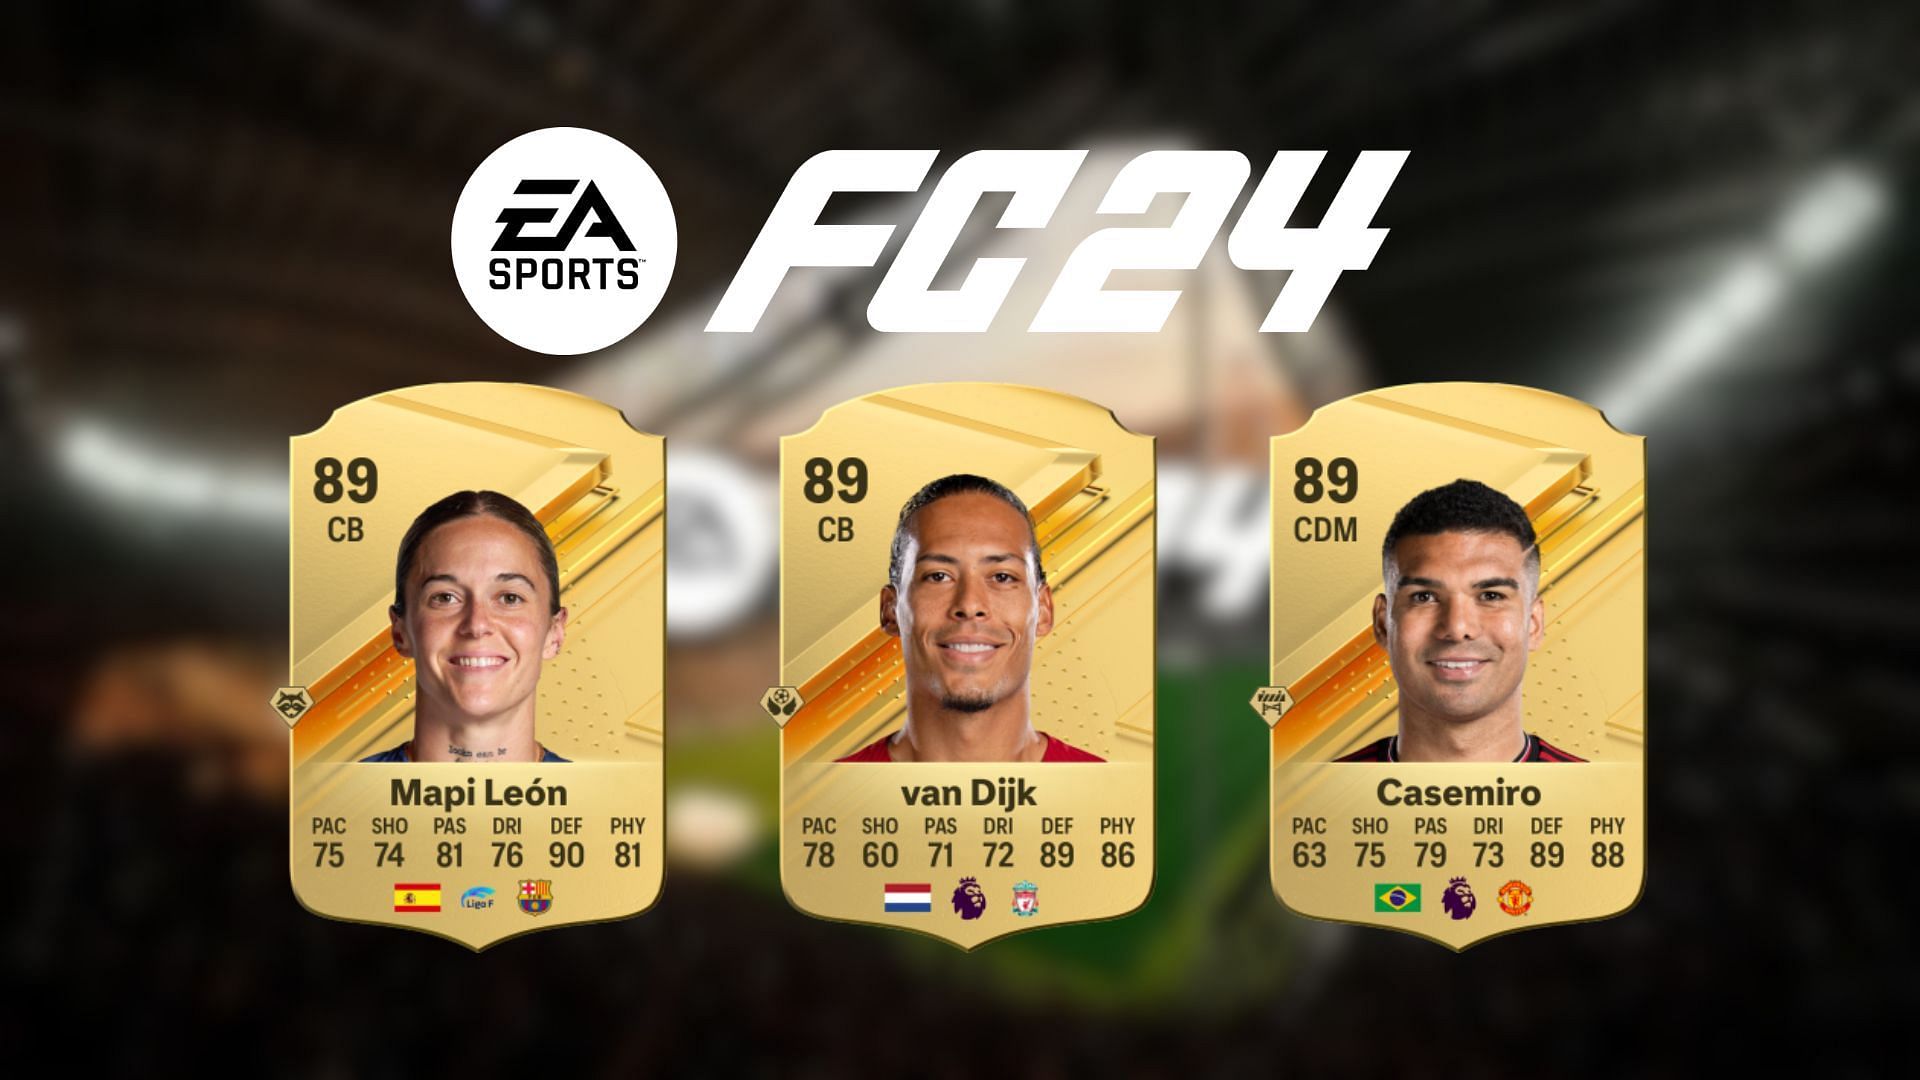 Top 5 EA FC 24 players with the highest Defense